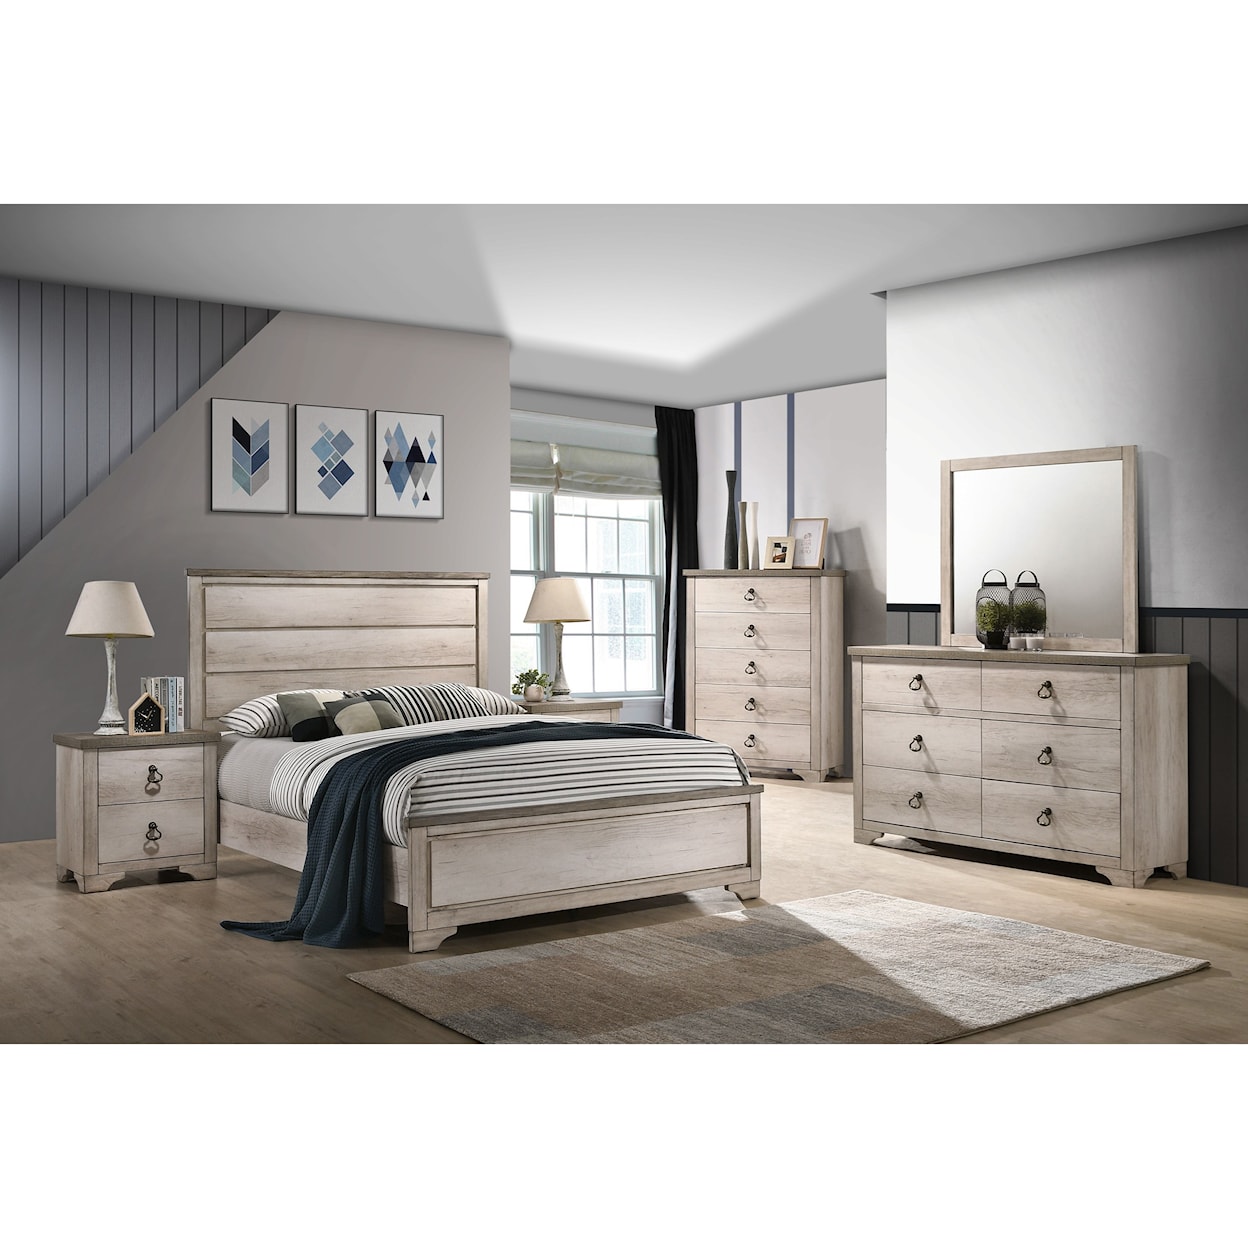 Crown Mark Patterson Full Panel Bed